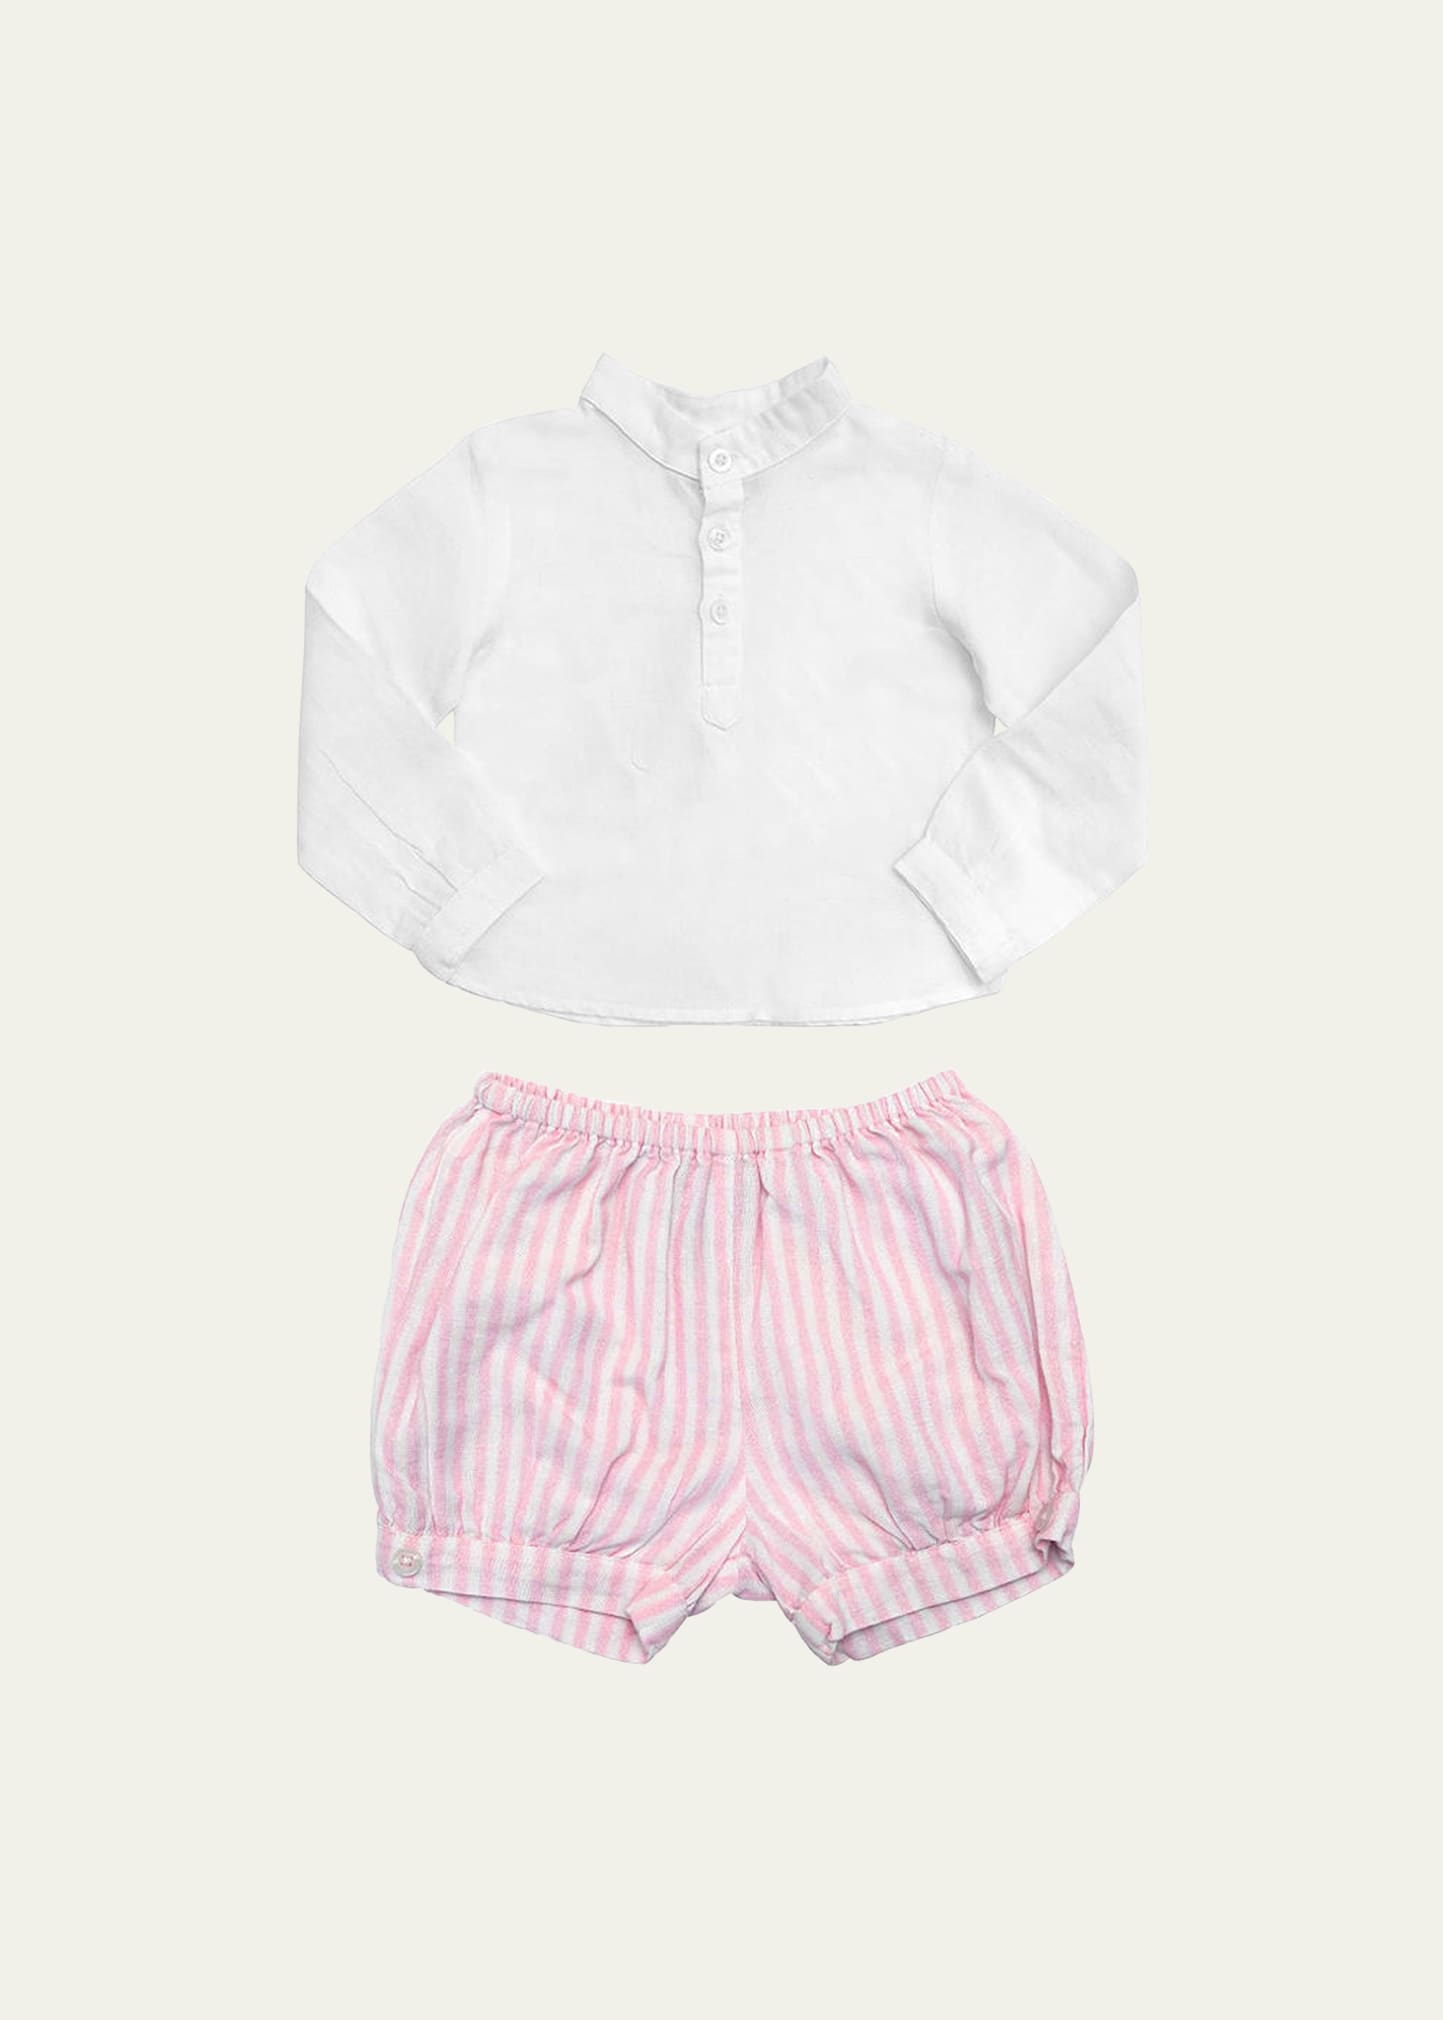 Louelle Girl's Blouse W/ Bloomers Two-piece Set